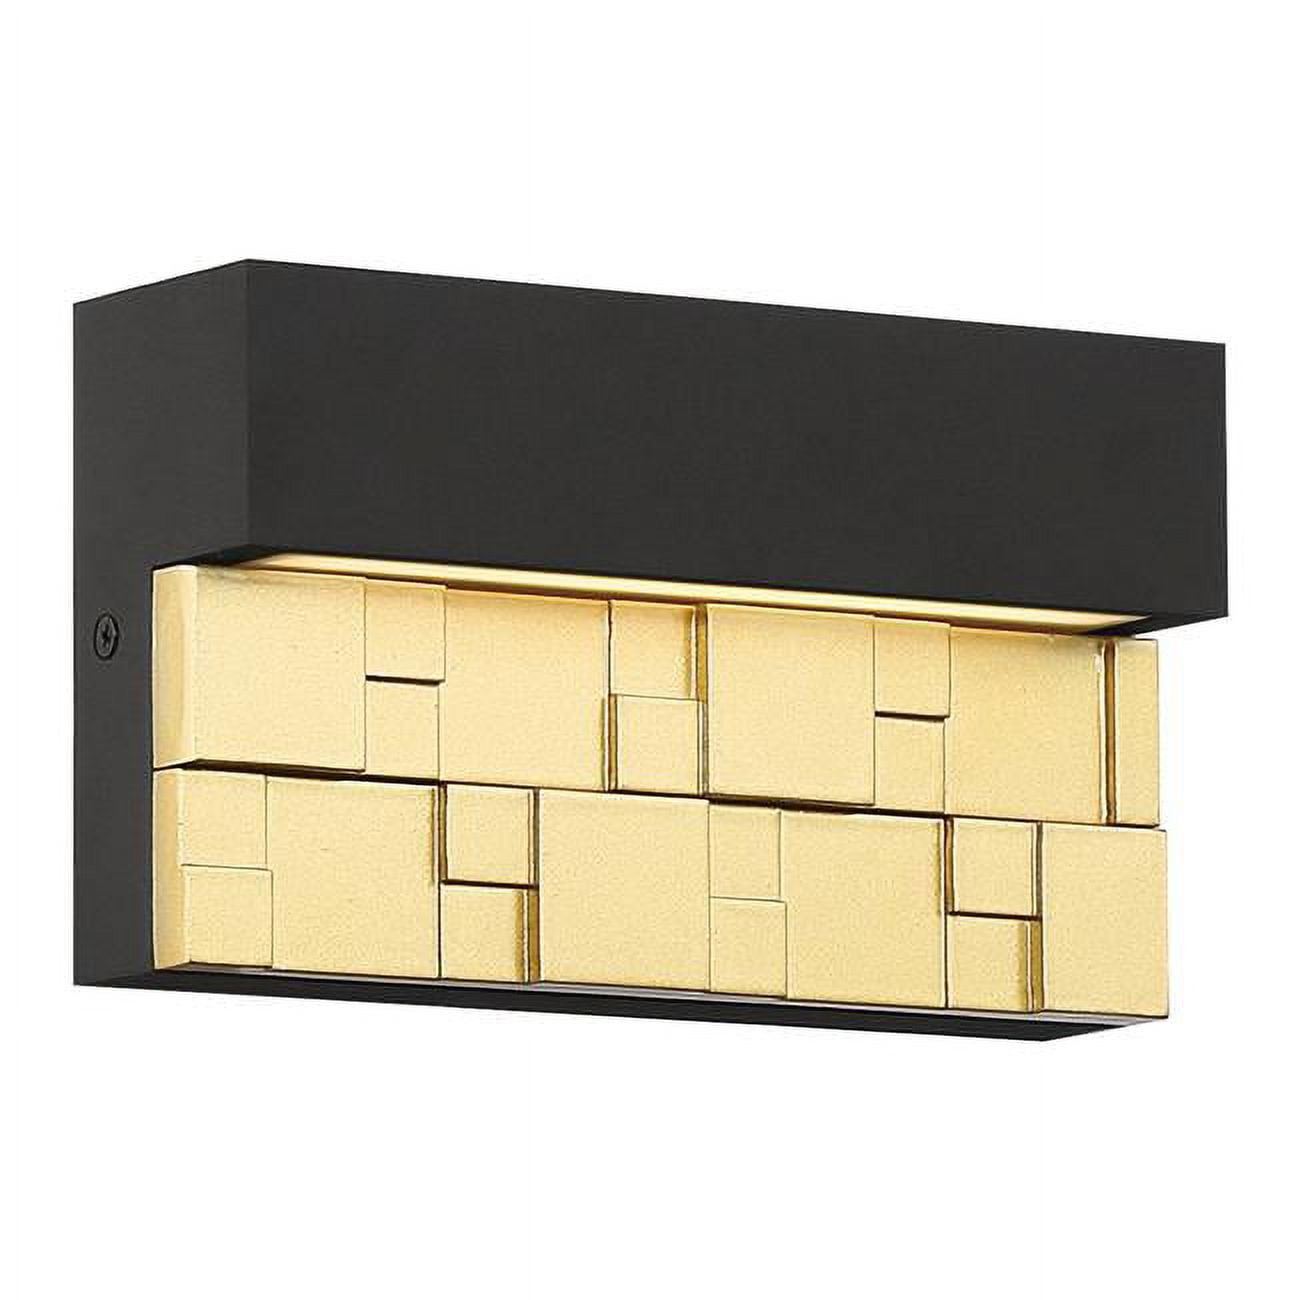 Picture of Access Lighting 20049LEDDMG-BRZ-GLD 8 in. Grid LED ADA Wall Sconce Light, Bronze with Gold